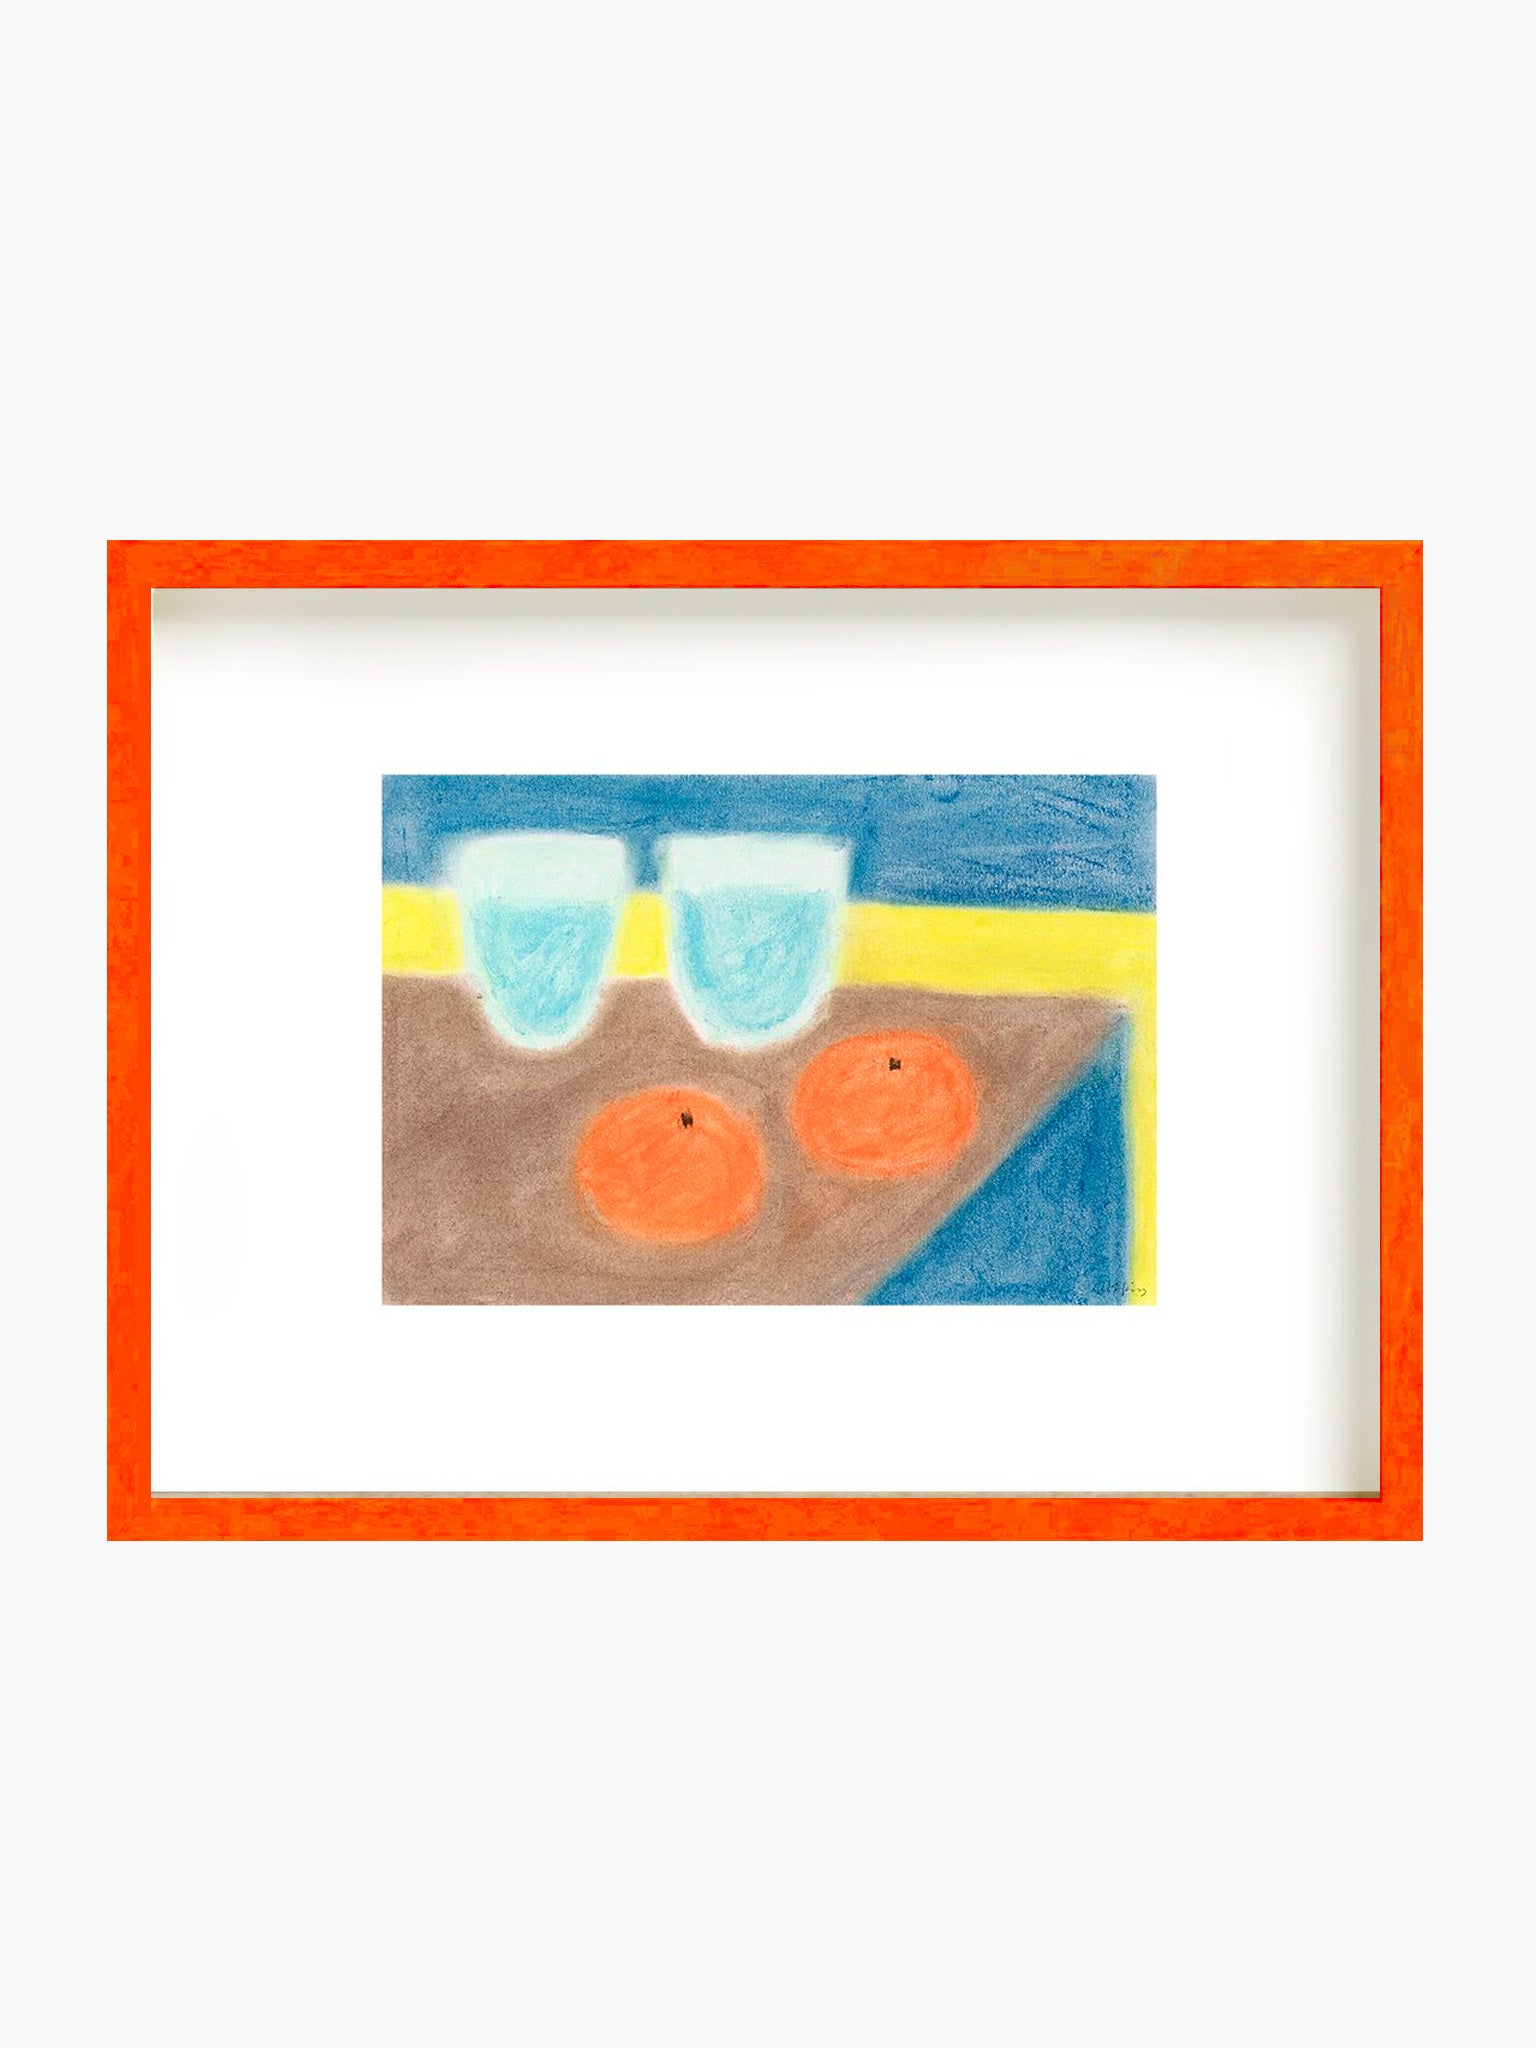 Water and Clementines by Nina Flagstad Kvorning (2 Sizes)